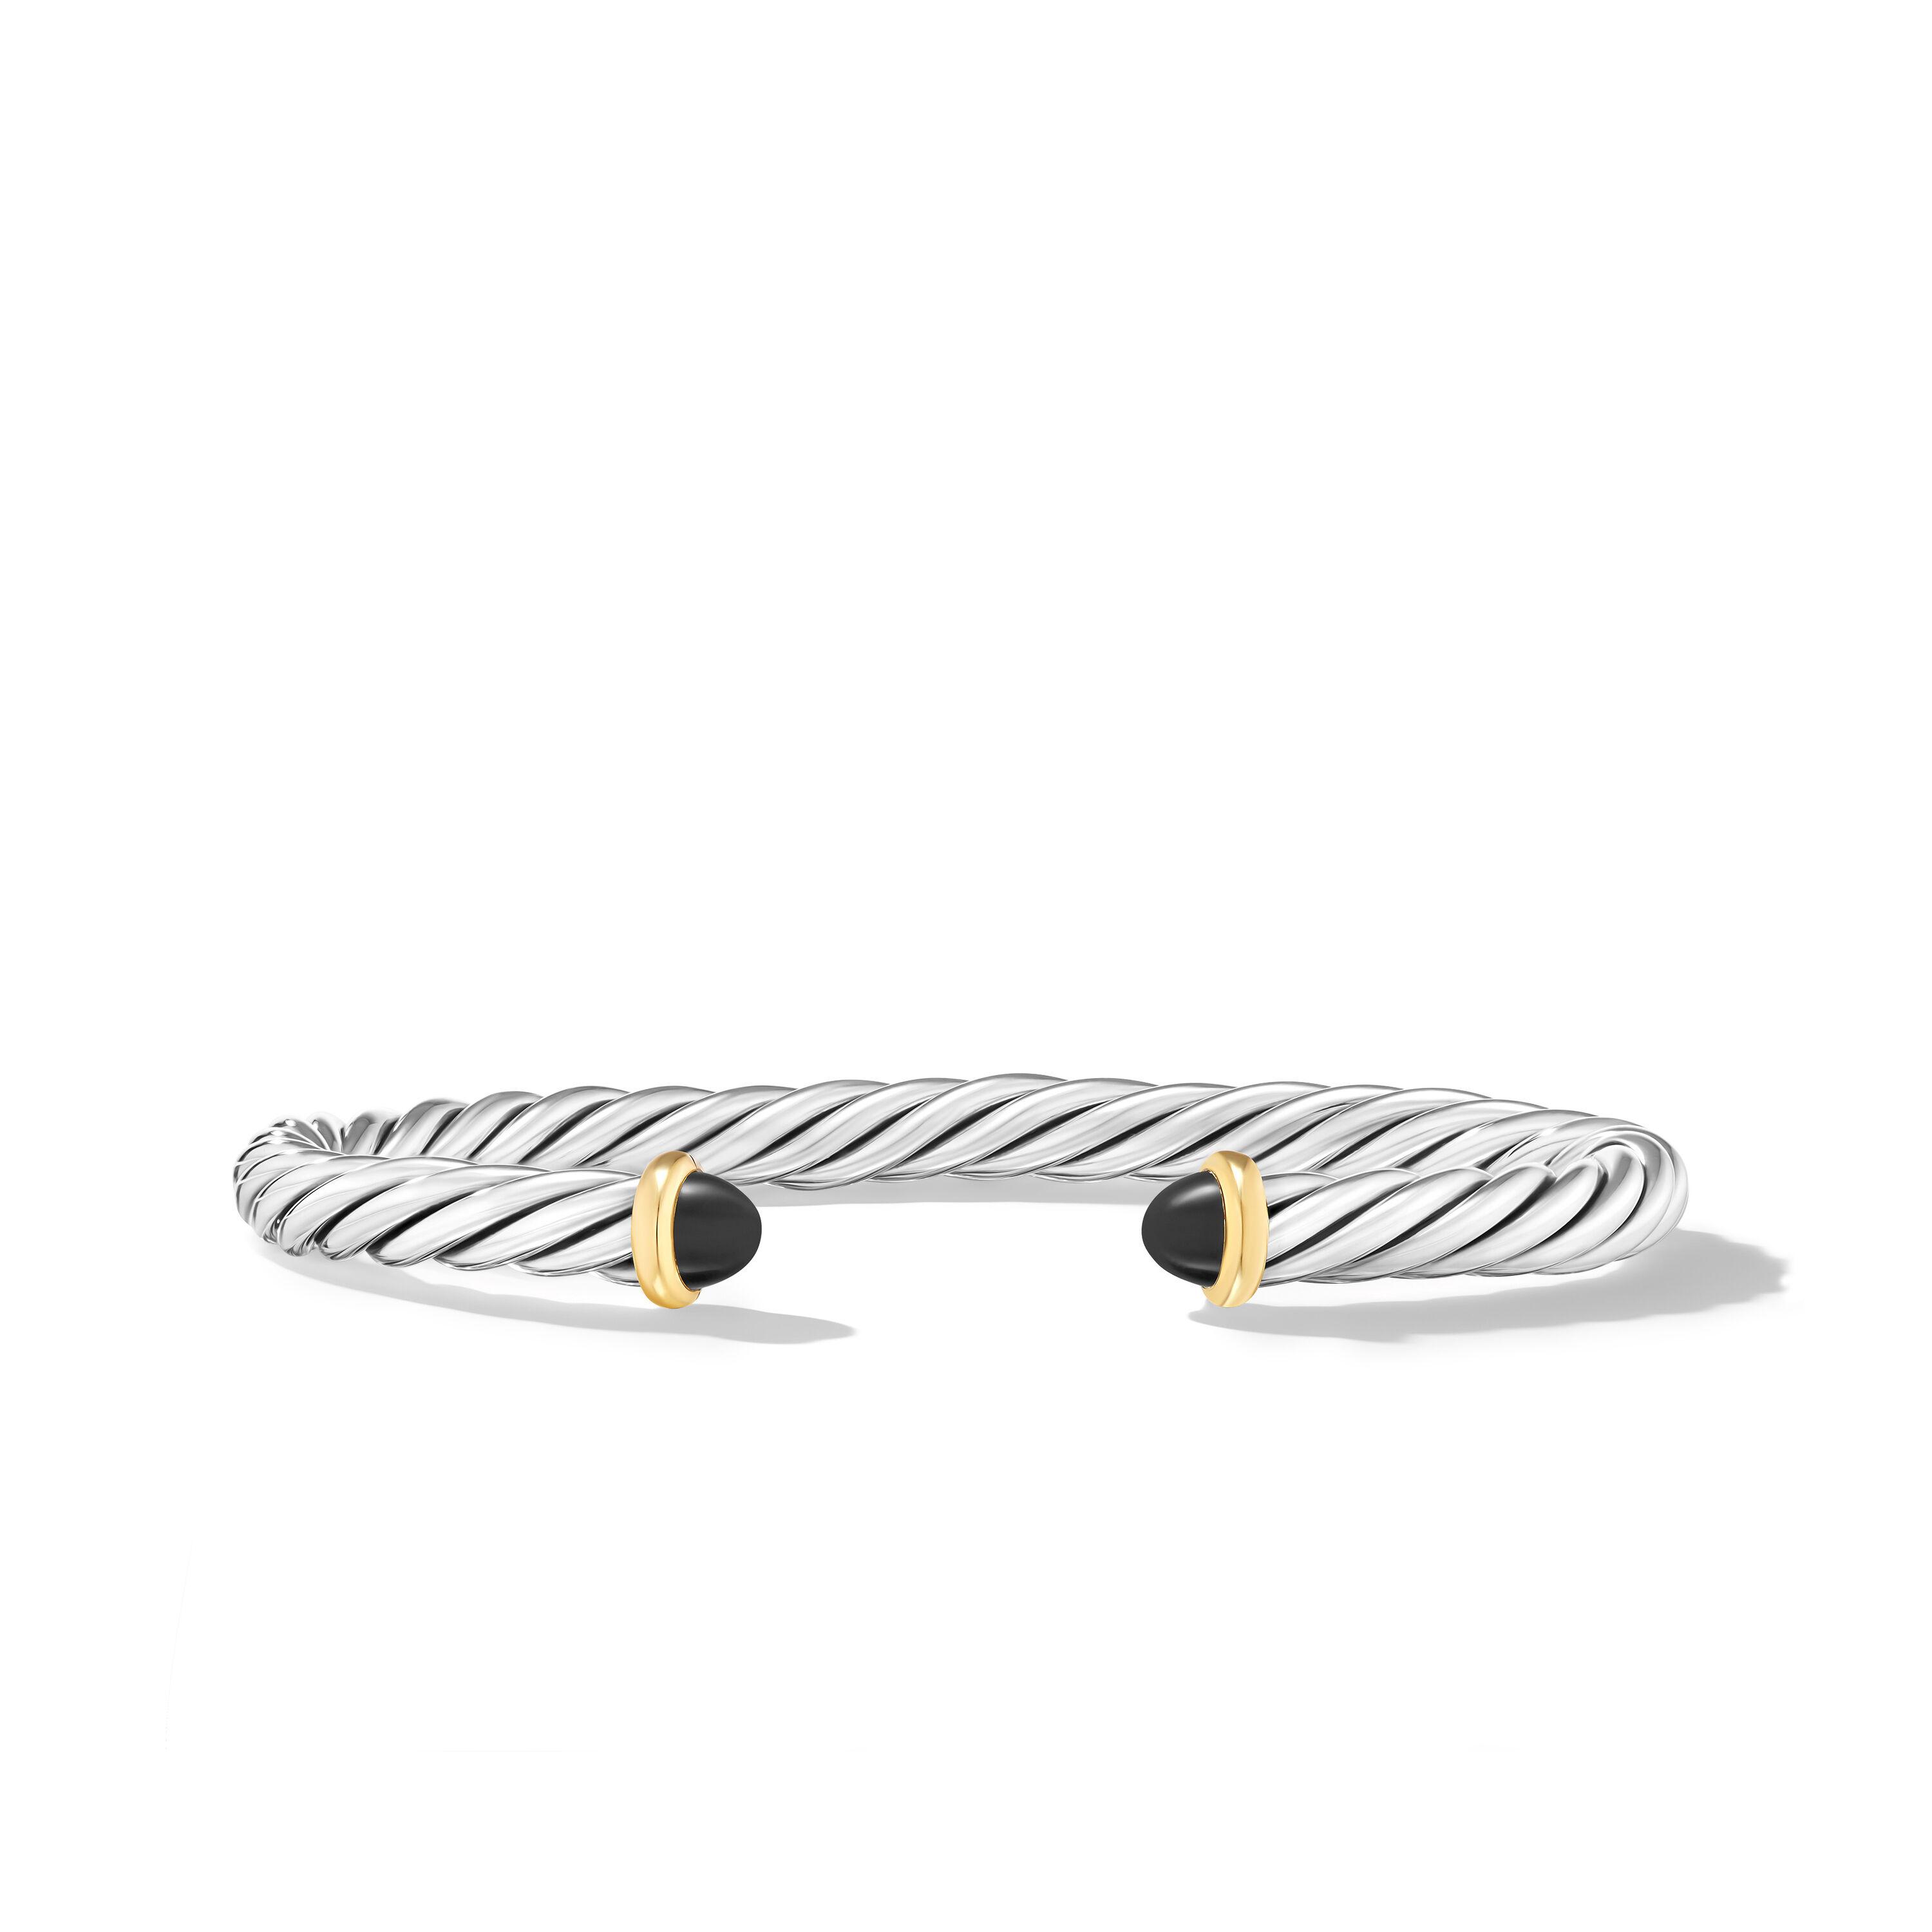 David Yurman 6mm Cable Cuff Bracelet in Sterling Silver with 14K Yellow Gold and Black Onyx, Large